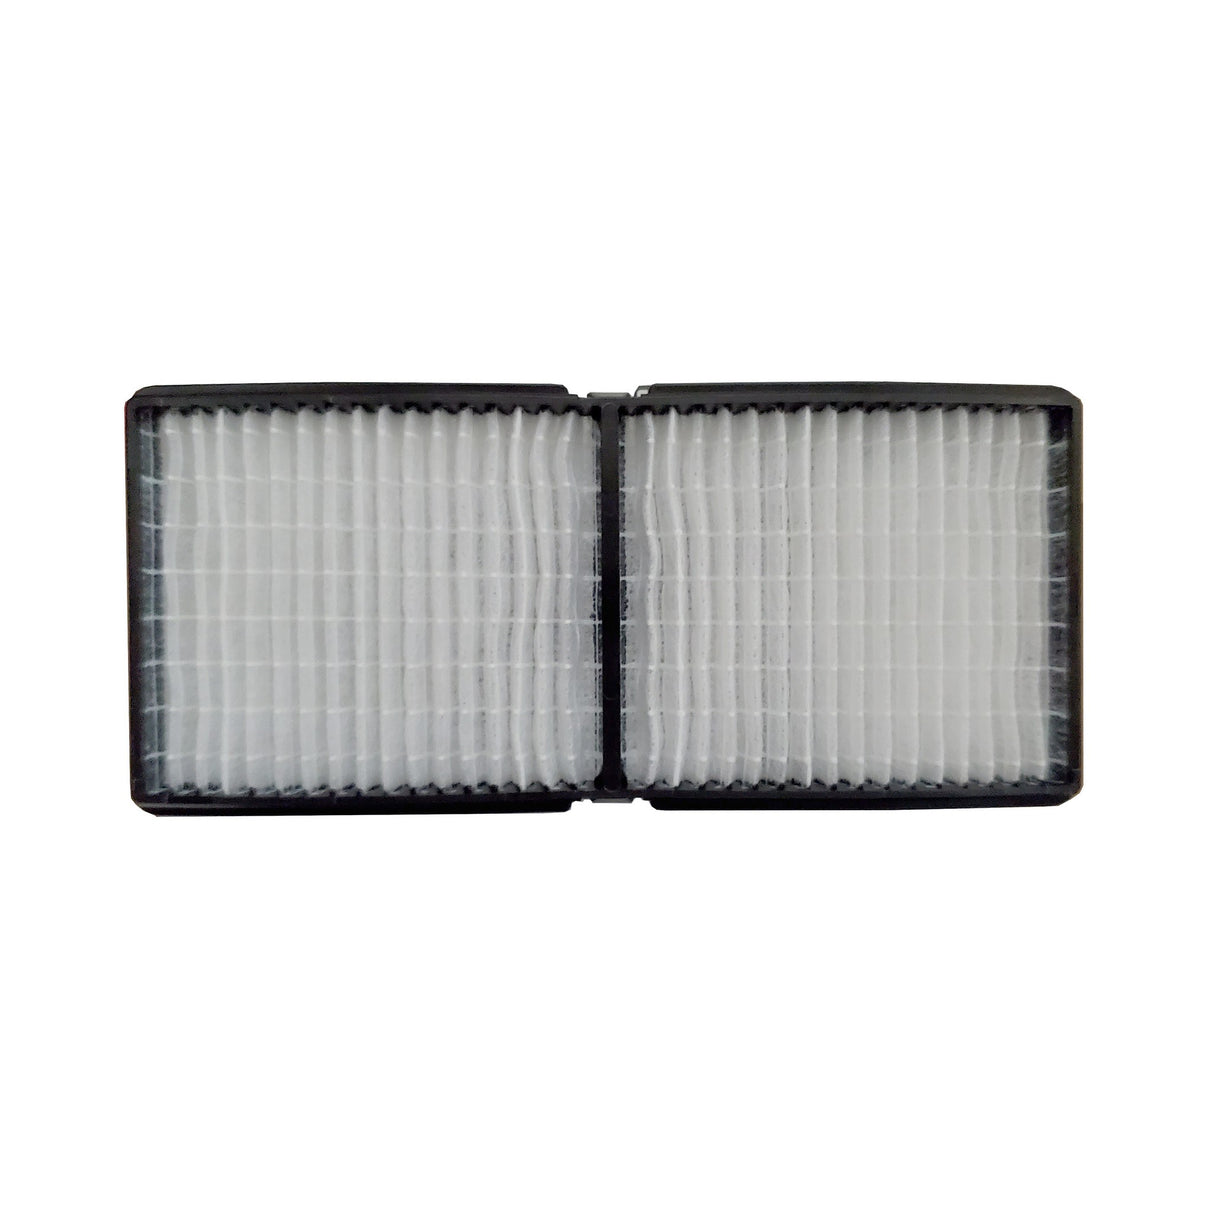 Epson V13H134A24 | Projector Replacement Air Filter for PL 1830 1925W